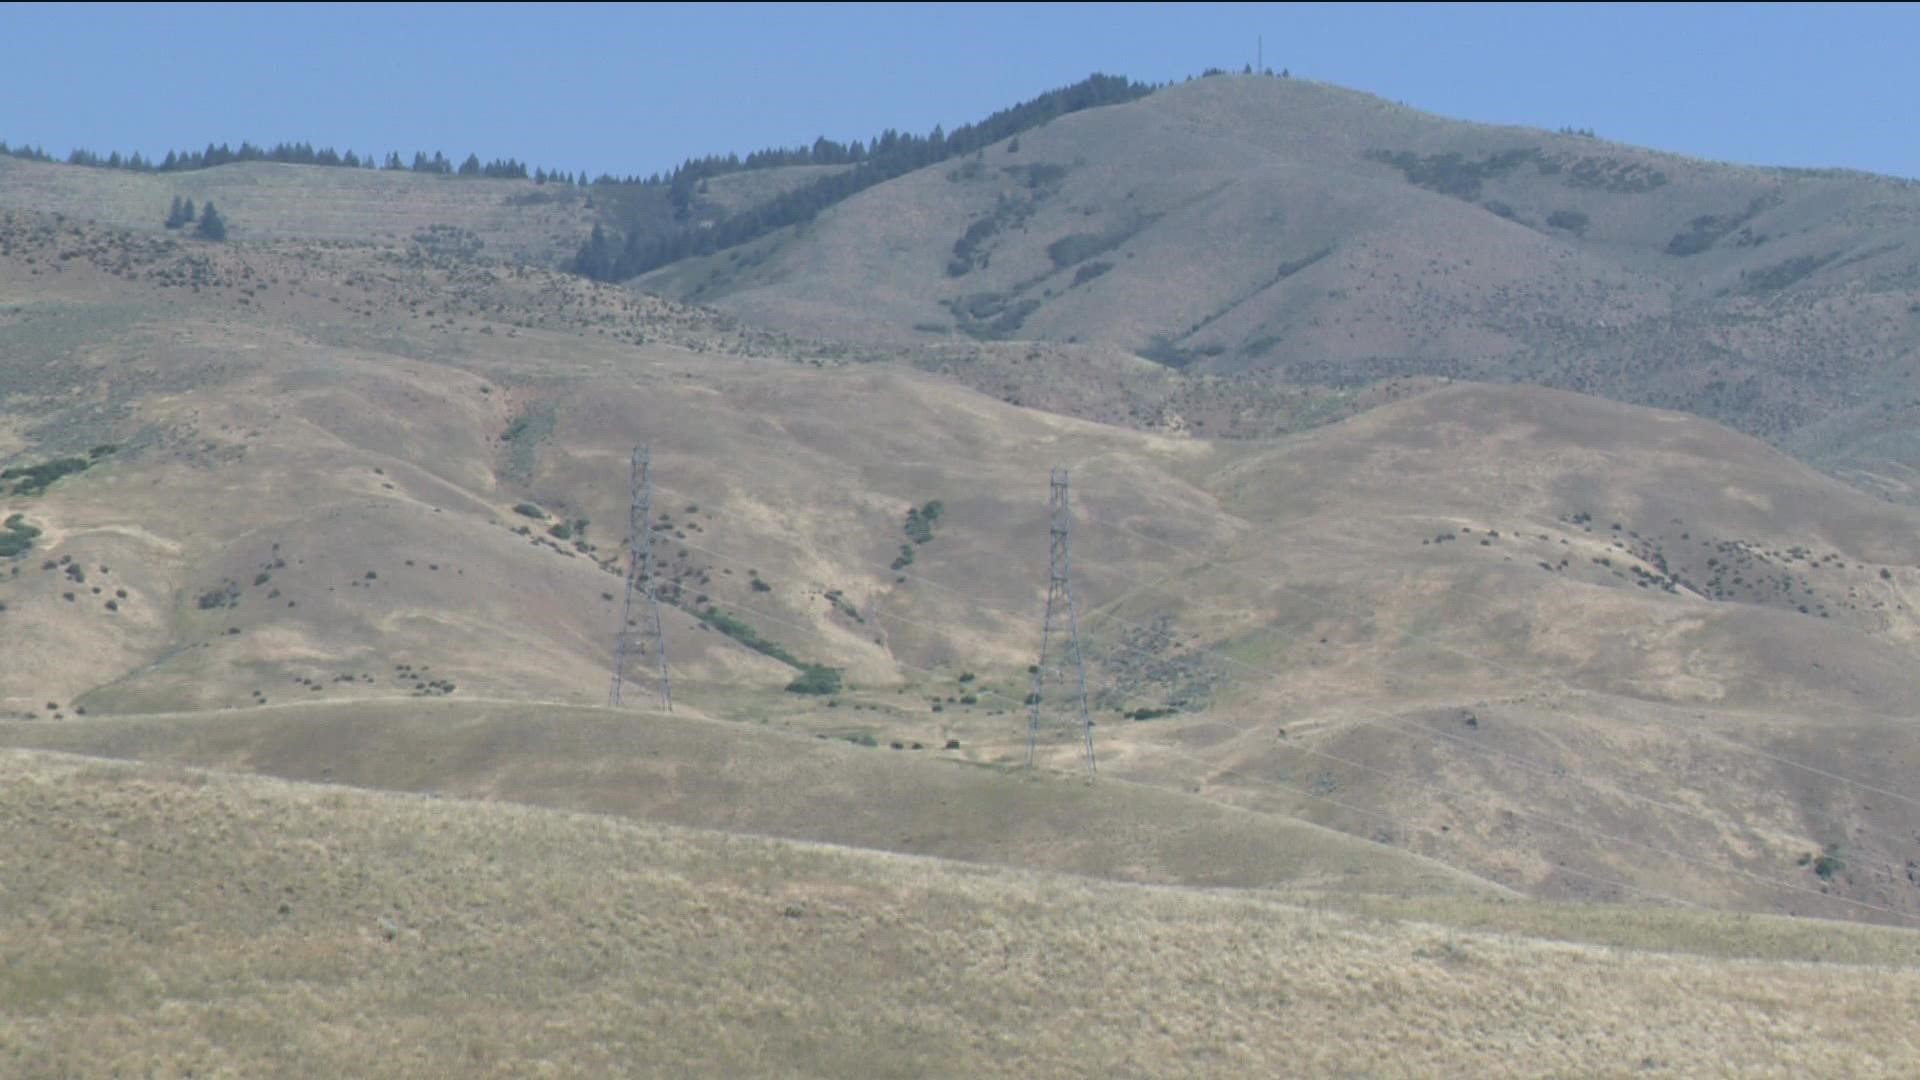 The acquired property is north of Barber Valley, overlooking Table Rock and downtown Boise, and connects other parcels of public land.